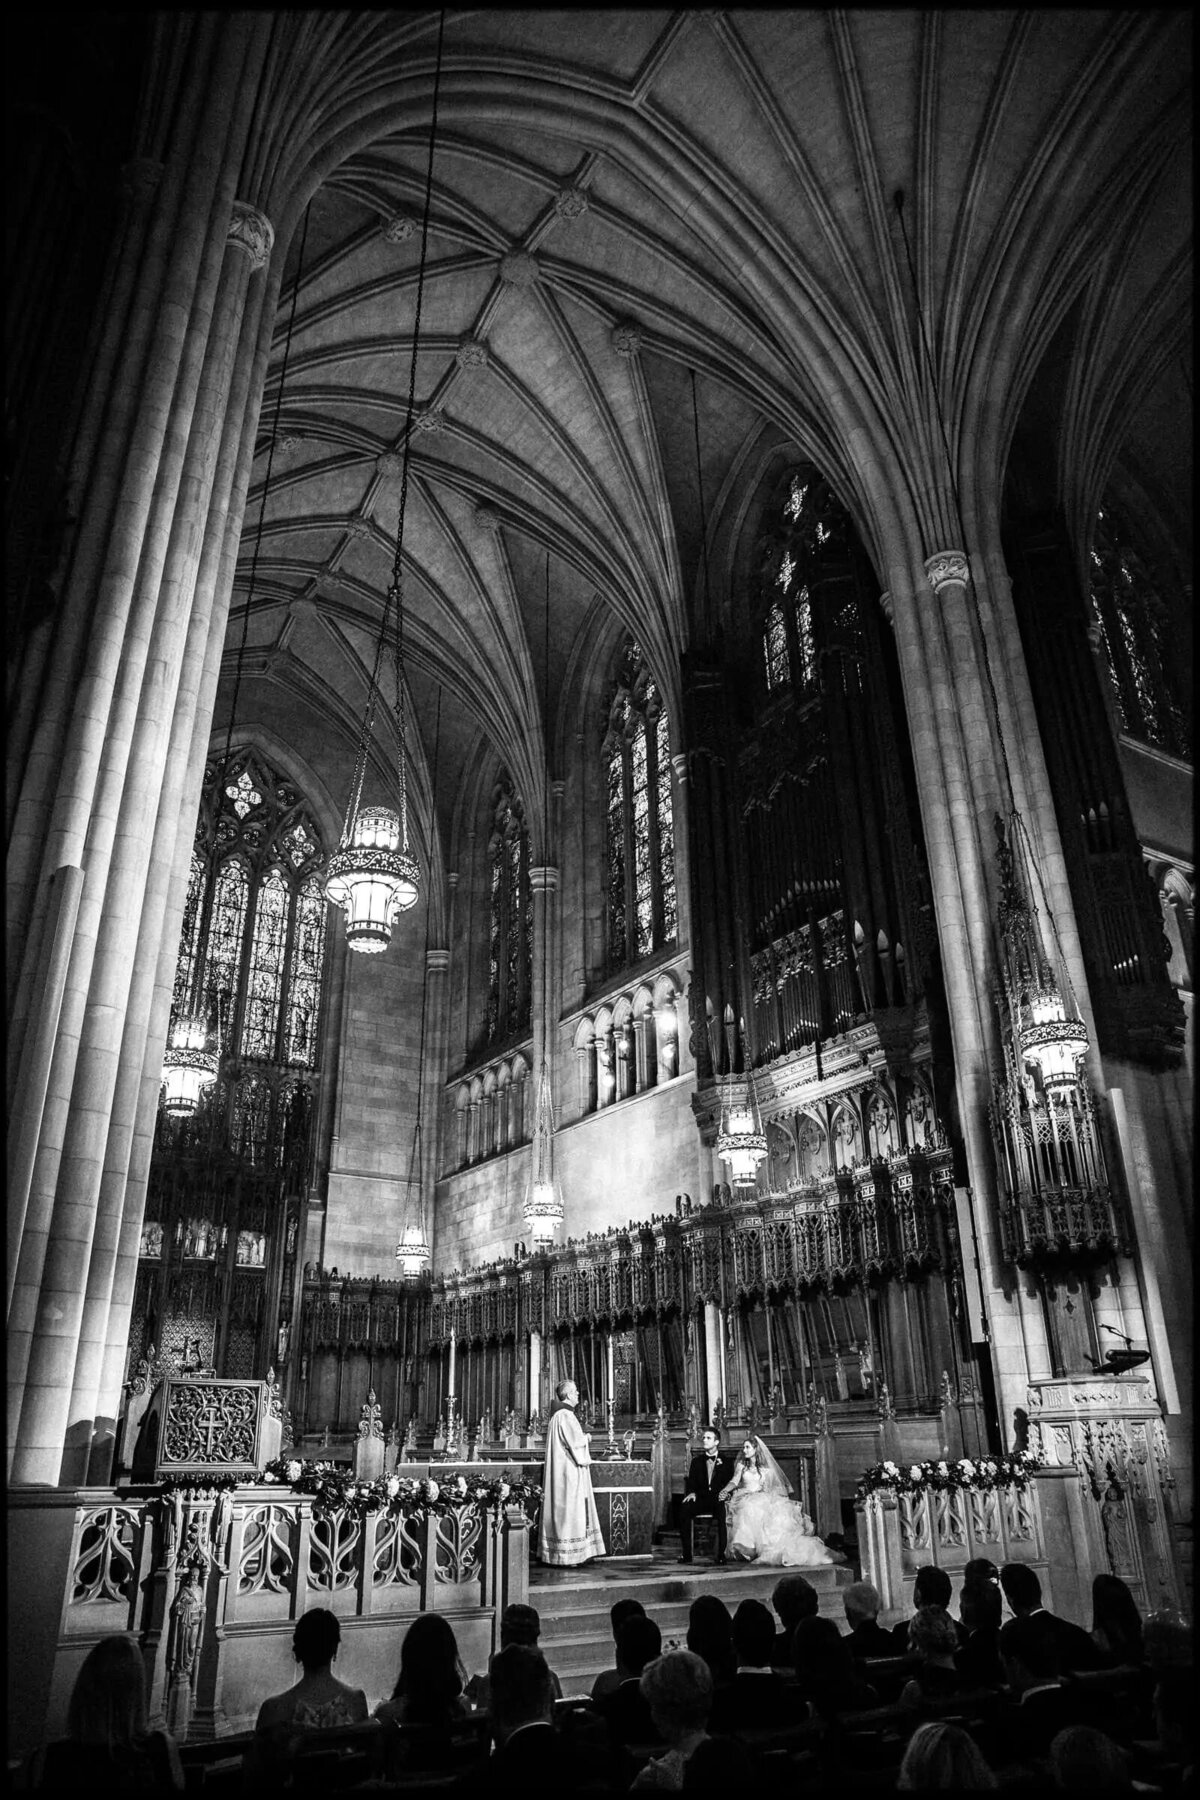 Wide shot of a wedding ceremony in the grand interior of Duke Chapel, with a couple at the altar and guests seated